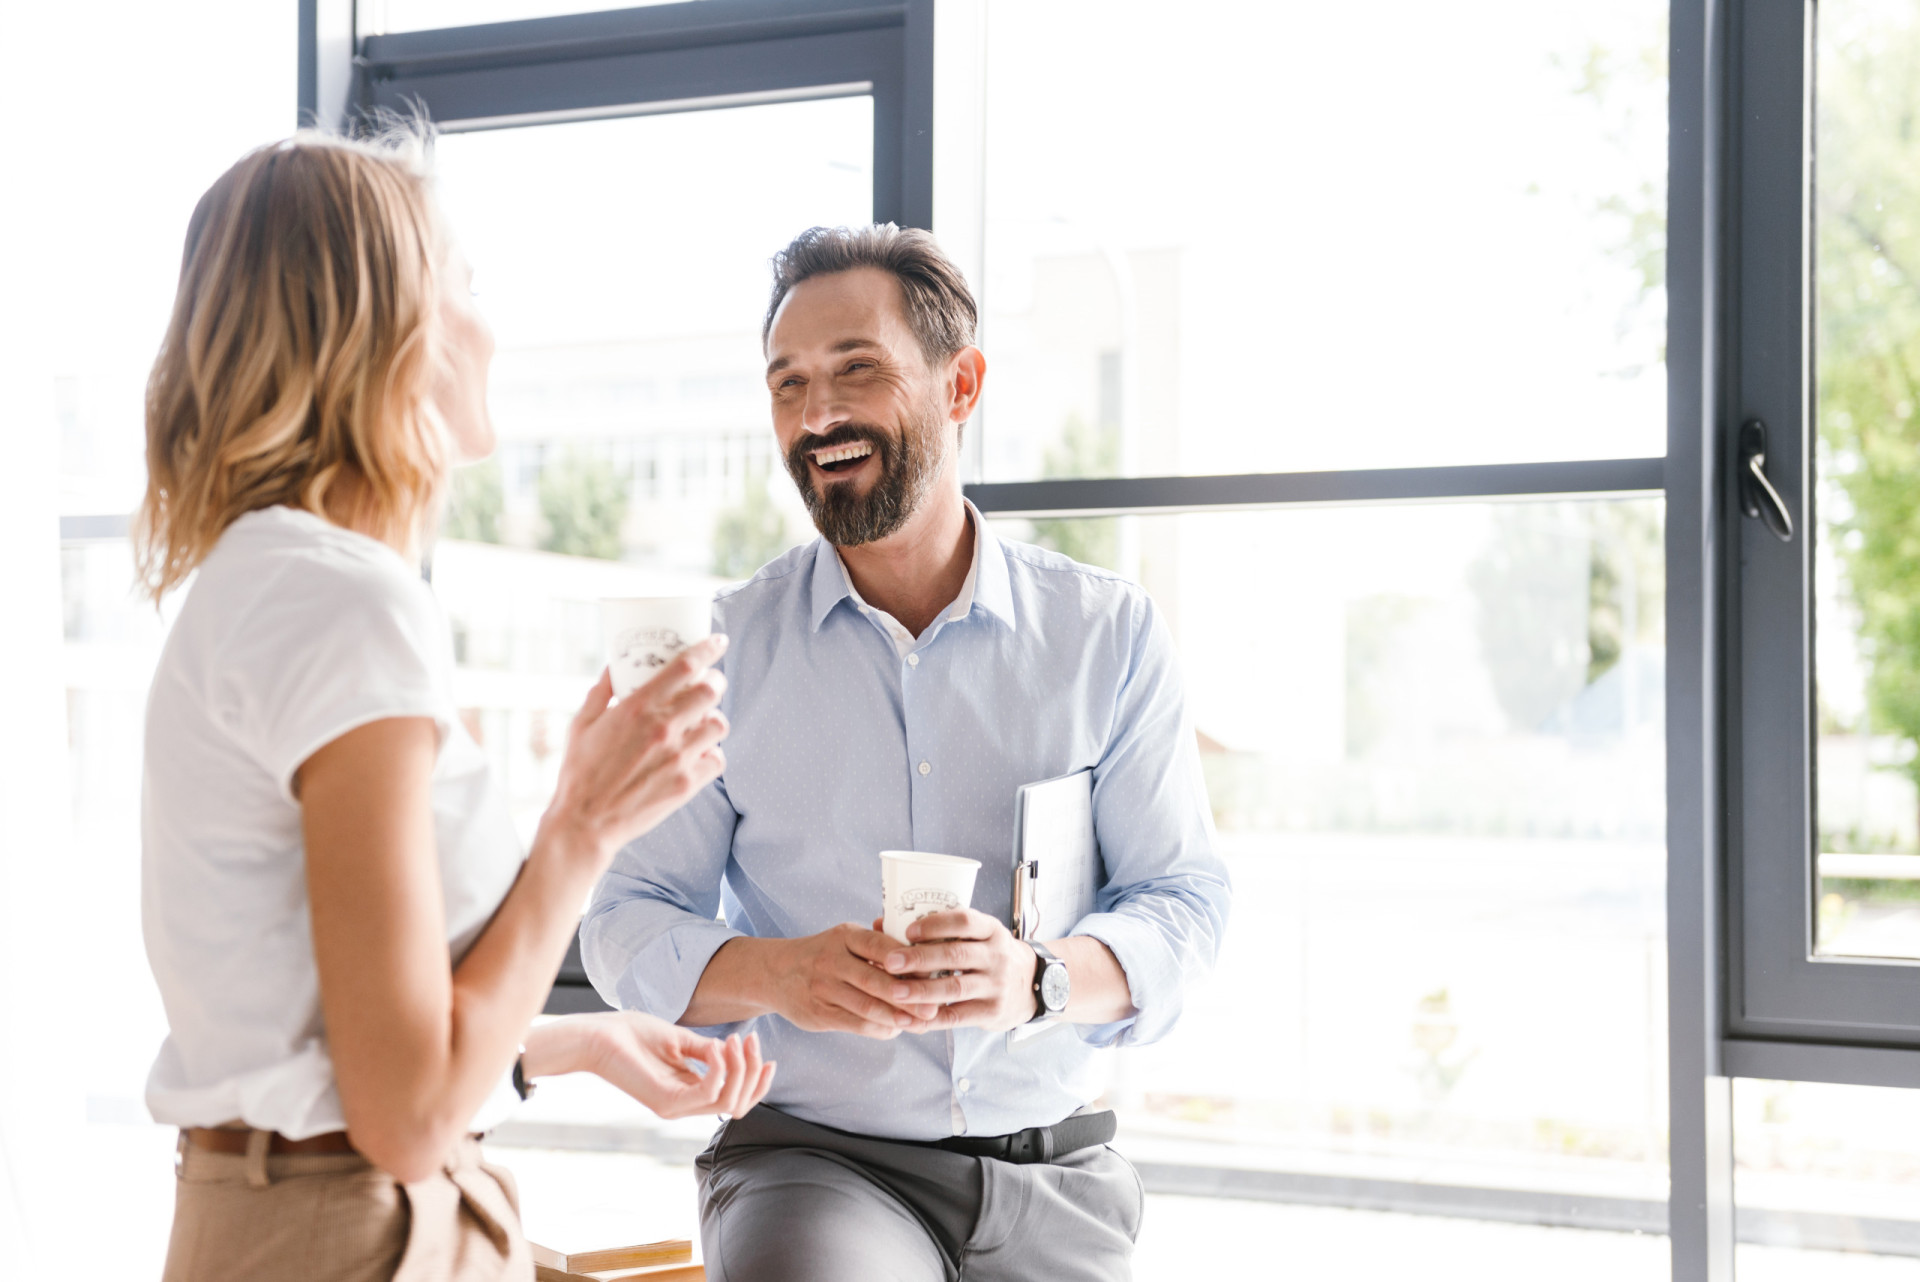 <p><span>The best way to strengthen your relationships at work is to be friendly with your colleagues. Greet them when they get to work, and take a few minutes to talk in the break room over a coffee, for example.</span></p><p><a href="https://www.msn.com/en-us/community/channel/vid-7xx8mnucu55yw63we9va2gwr7uihbxwc68fxqp25x6tg4ftibpra?cvid=94631541bc0f4f89bfd59158d696ad7e">Follow us and access great exclusive content every day</a></p>